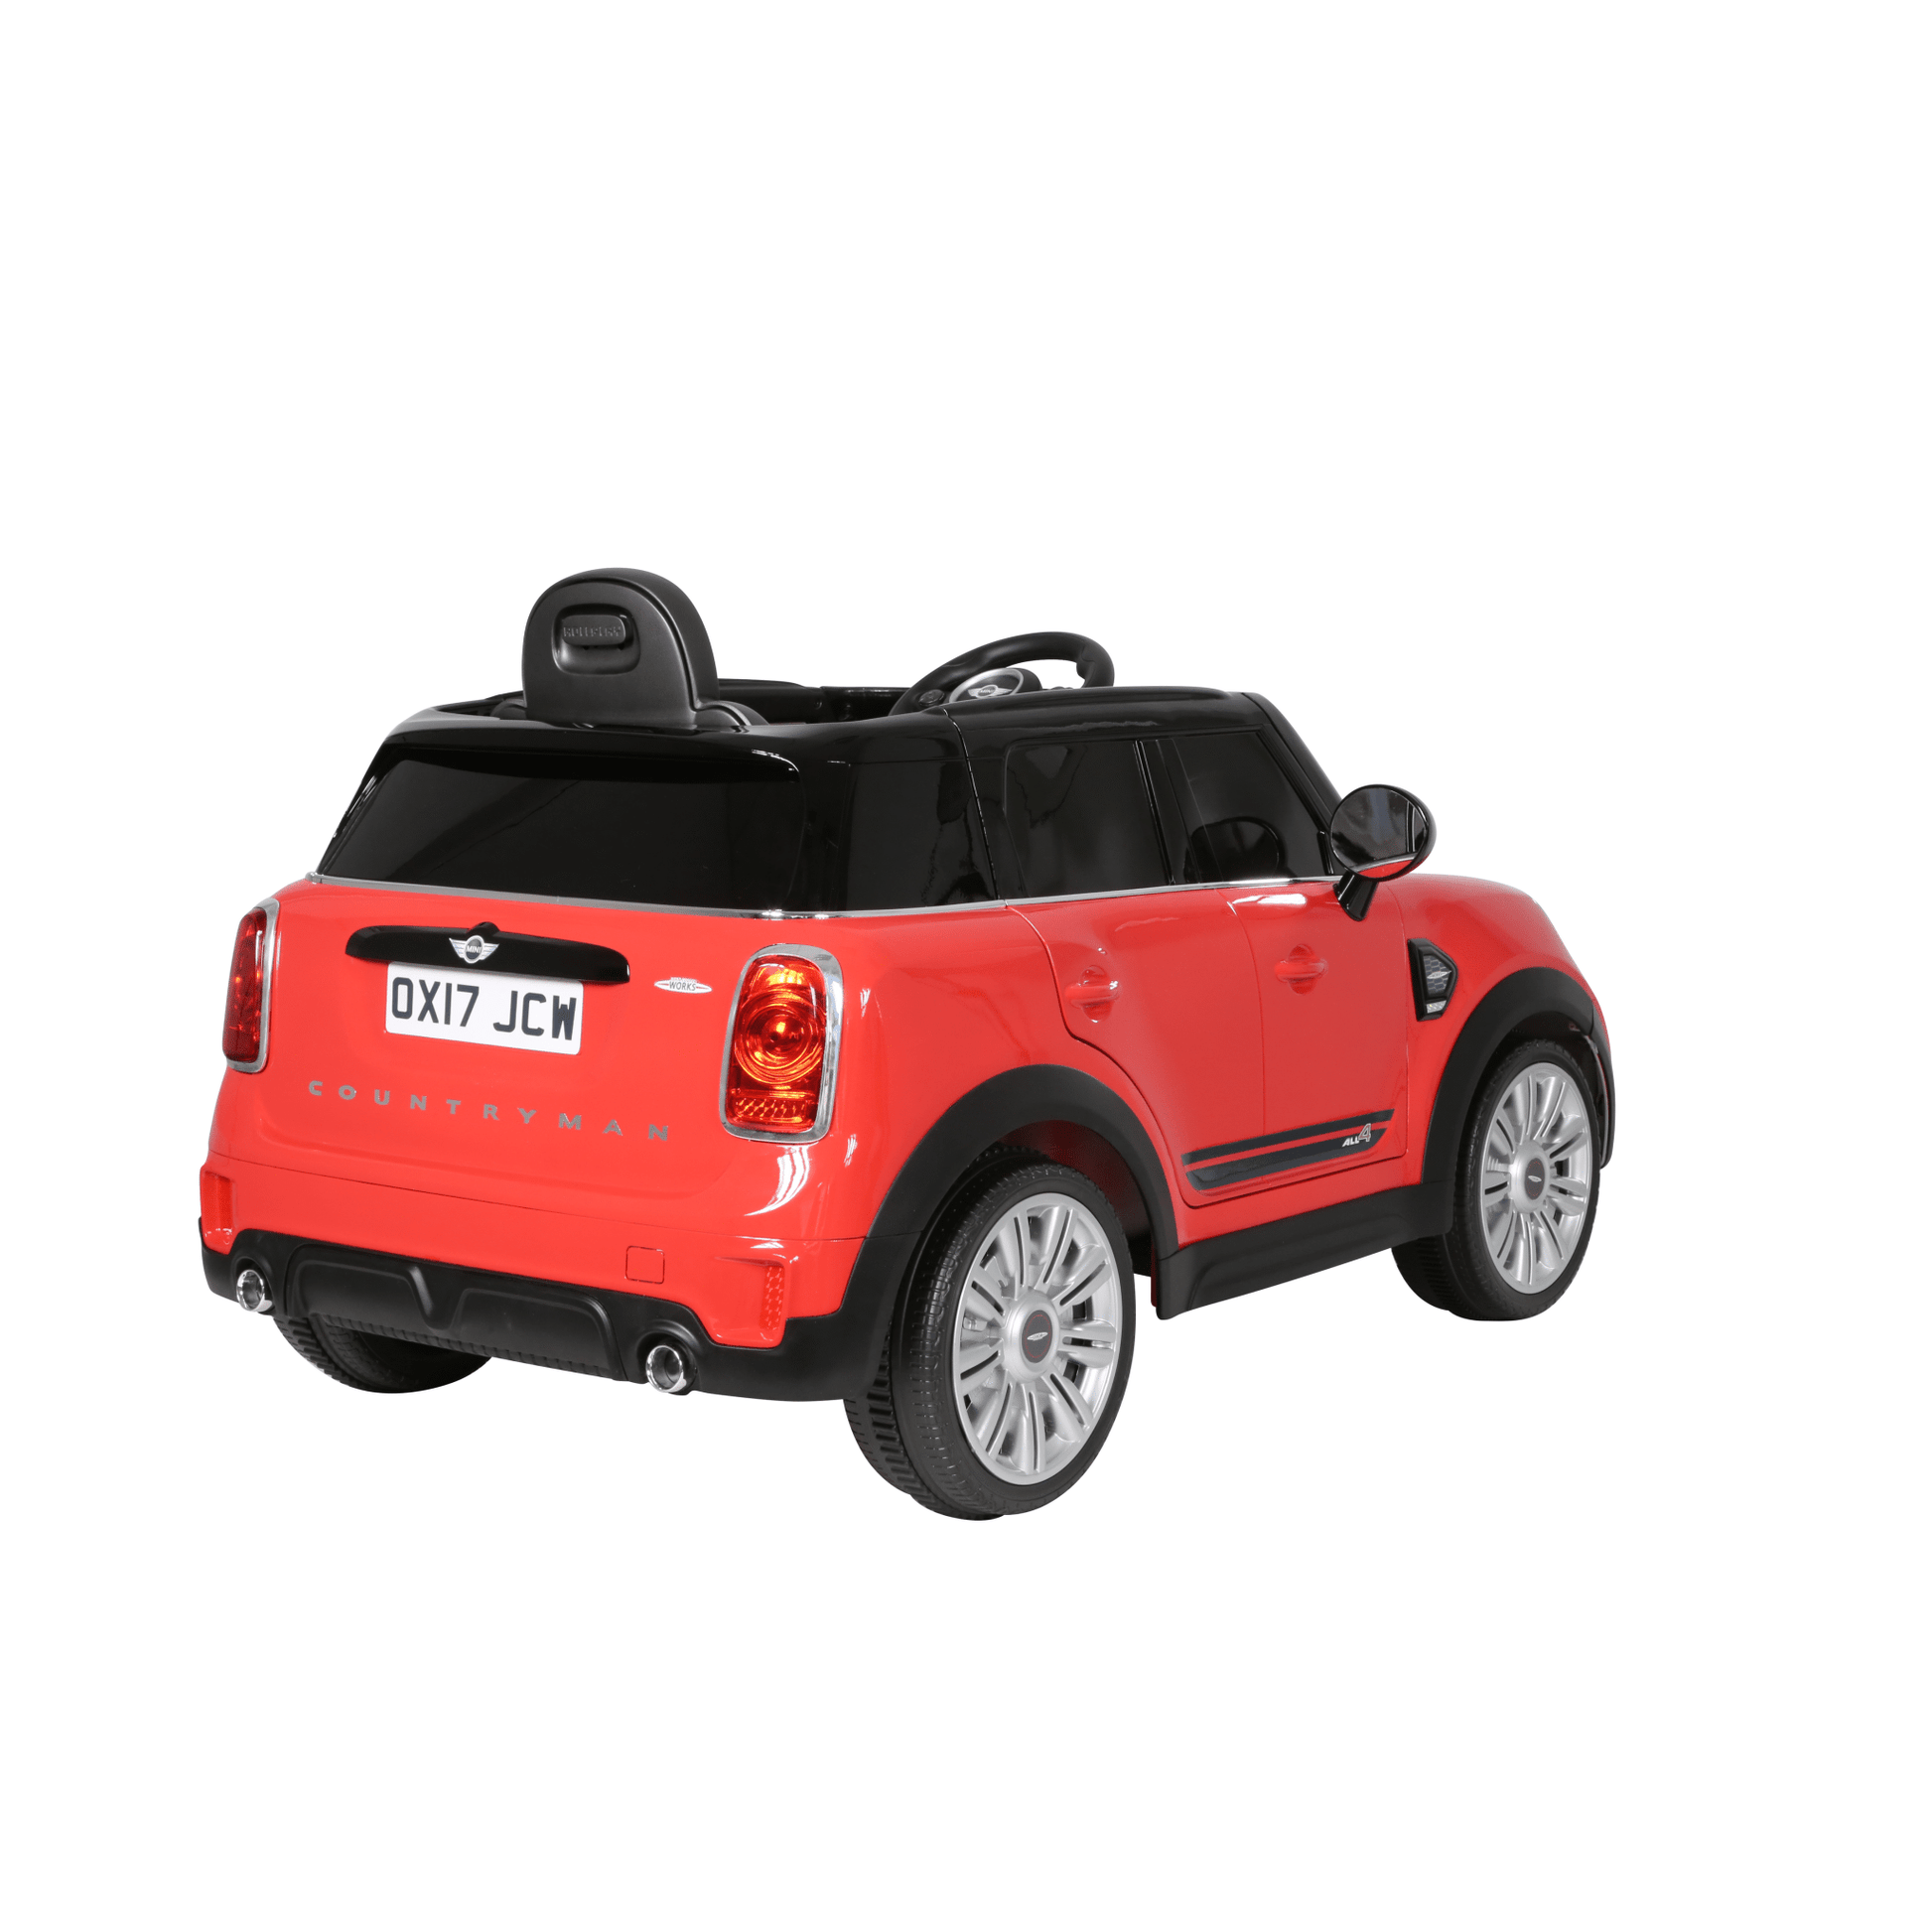 Mini Countryman 6 Volt Car with Remote Control - Red - The Online Toy Shop - Powered Car - 6